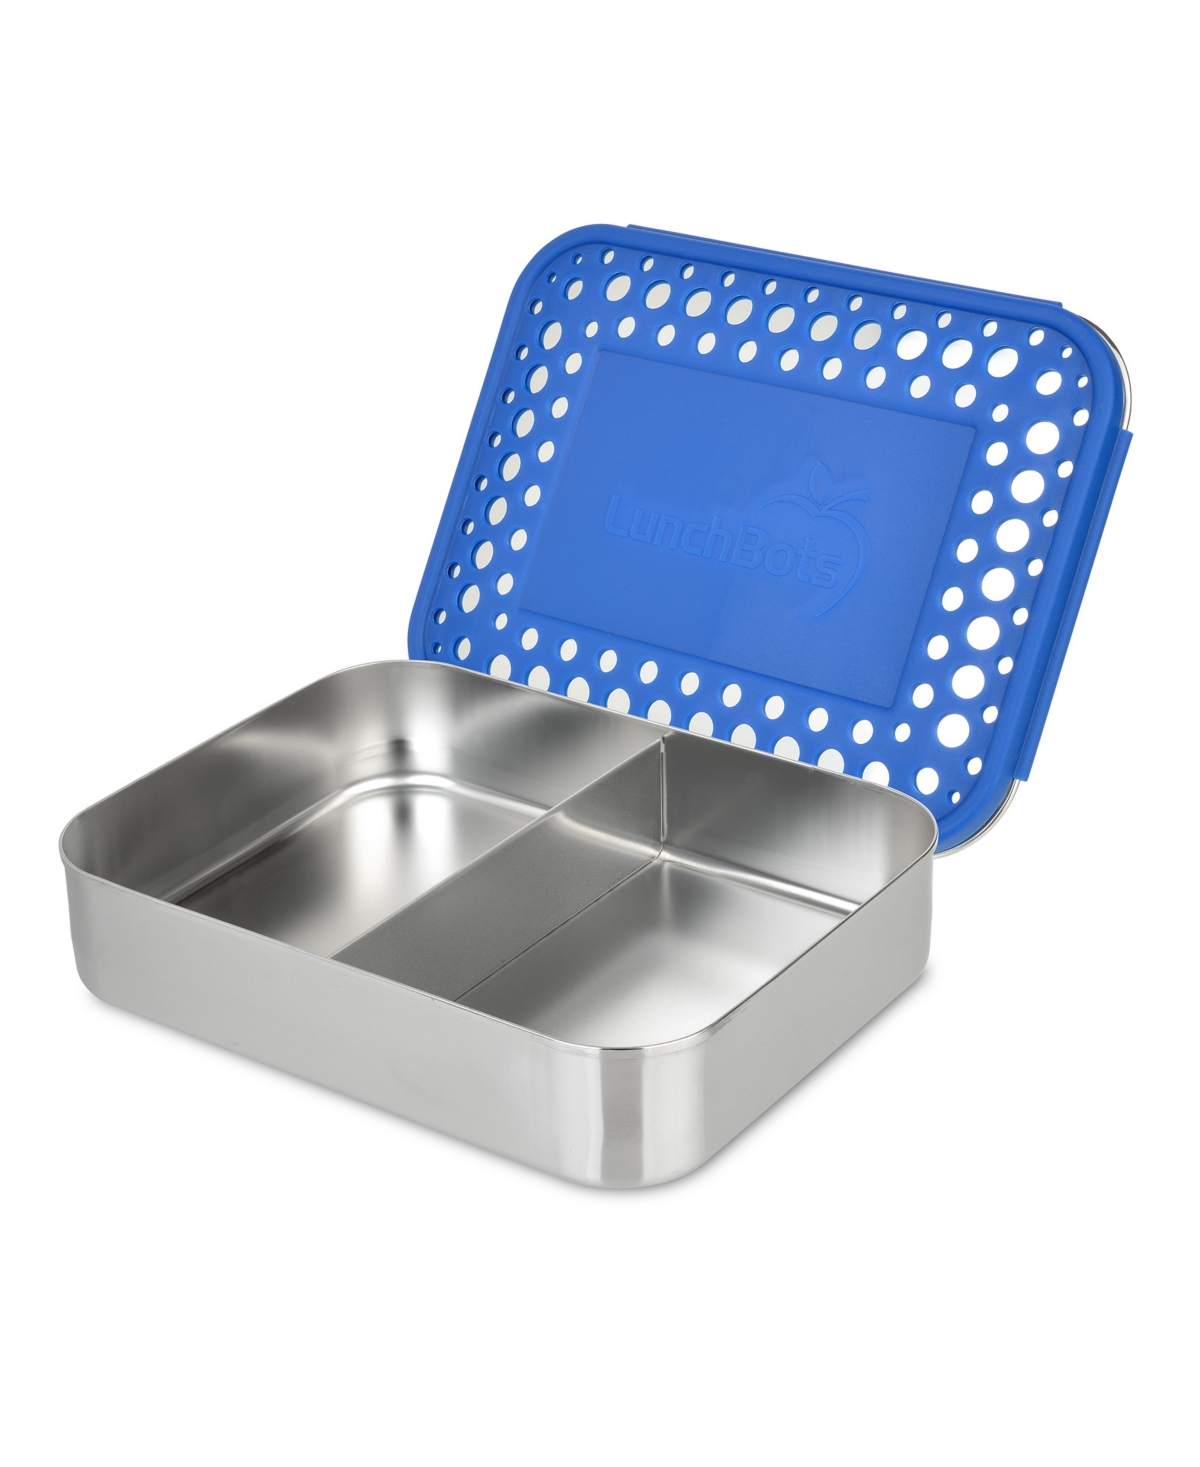 Lunchbots Stainless Steel Bento Lunch Box 2 Sections In Blue Dots